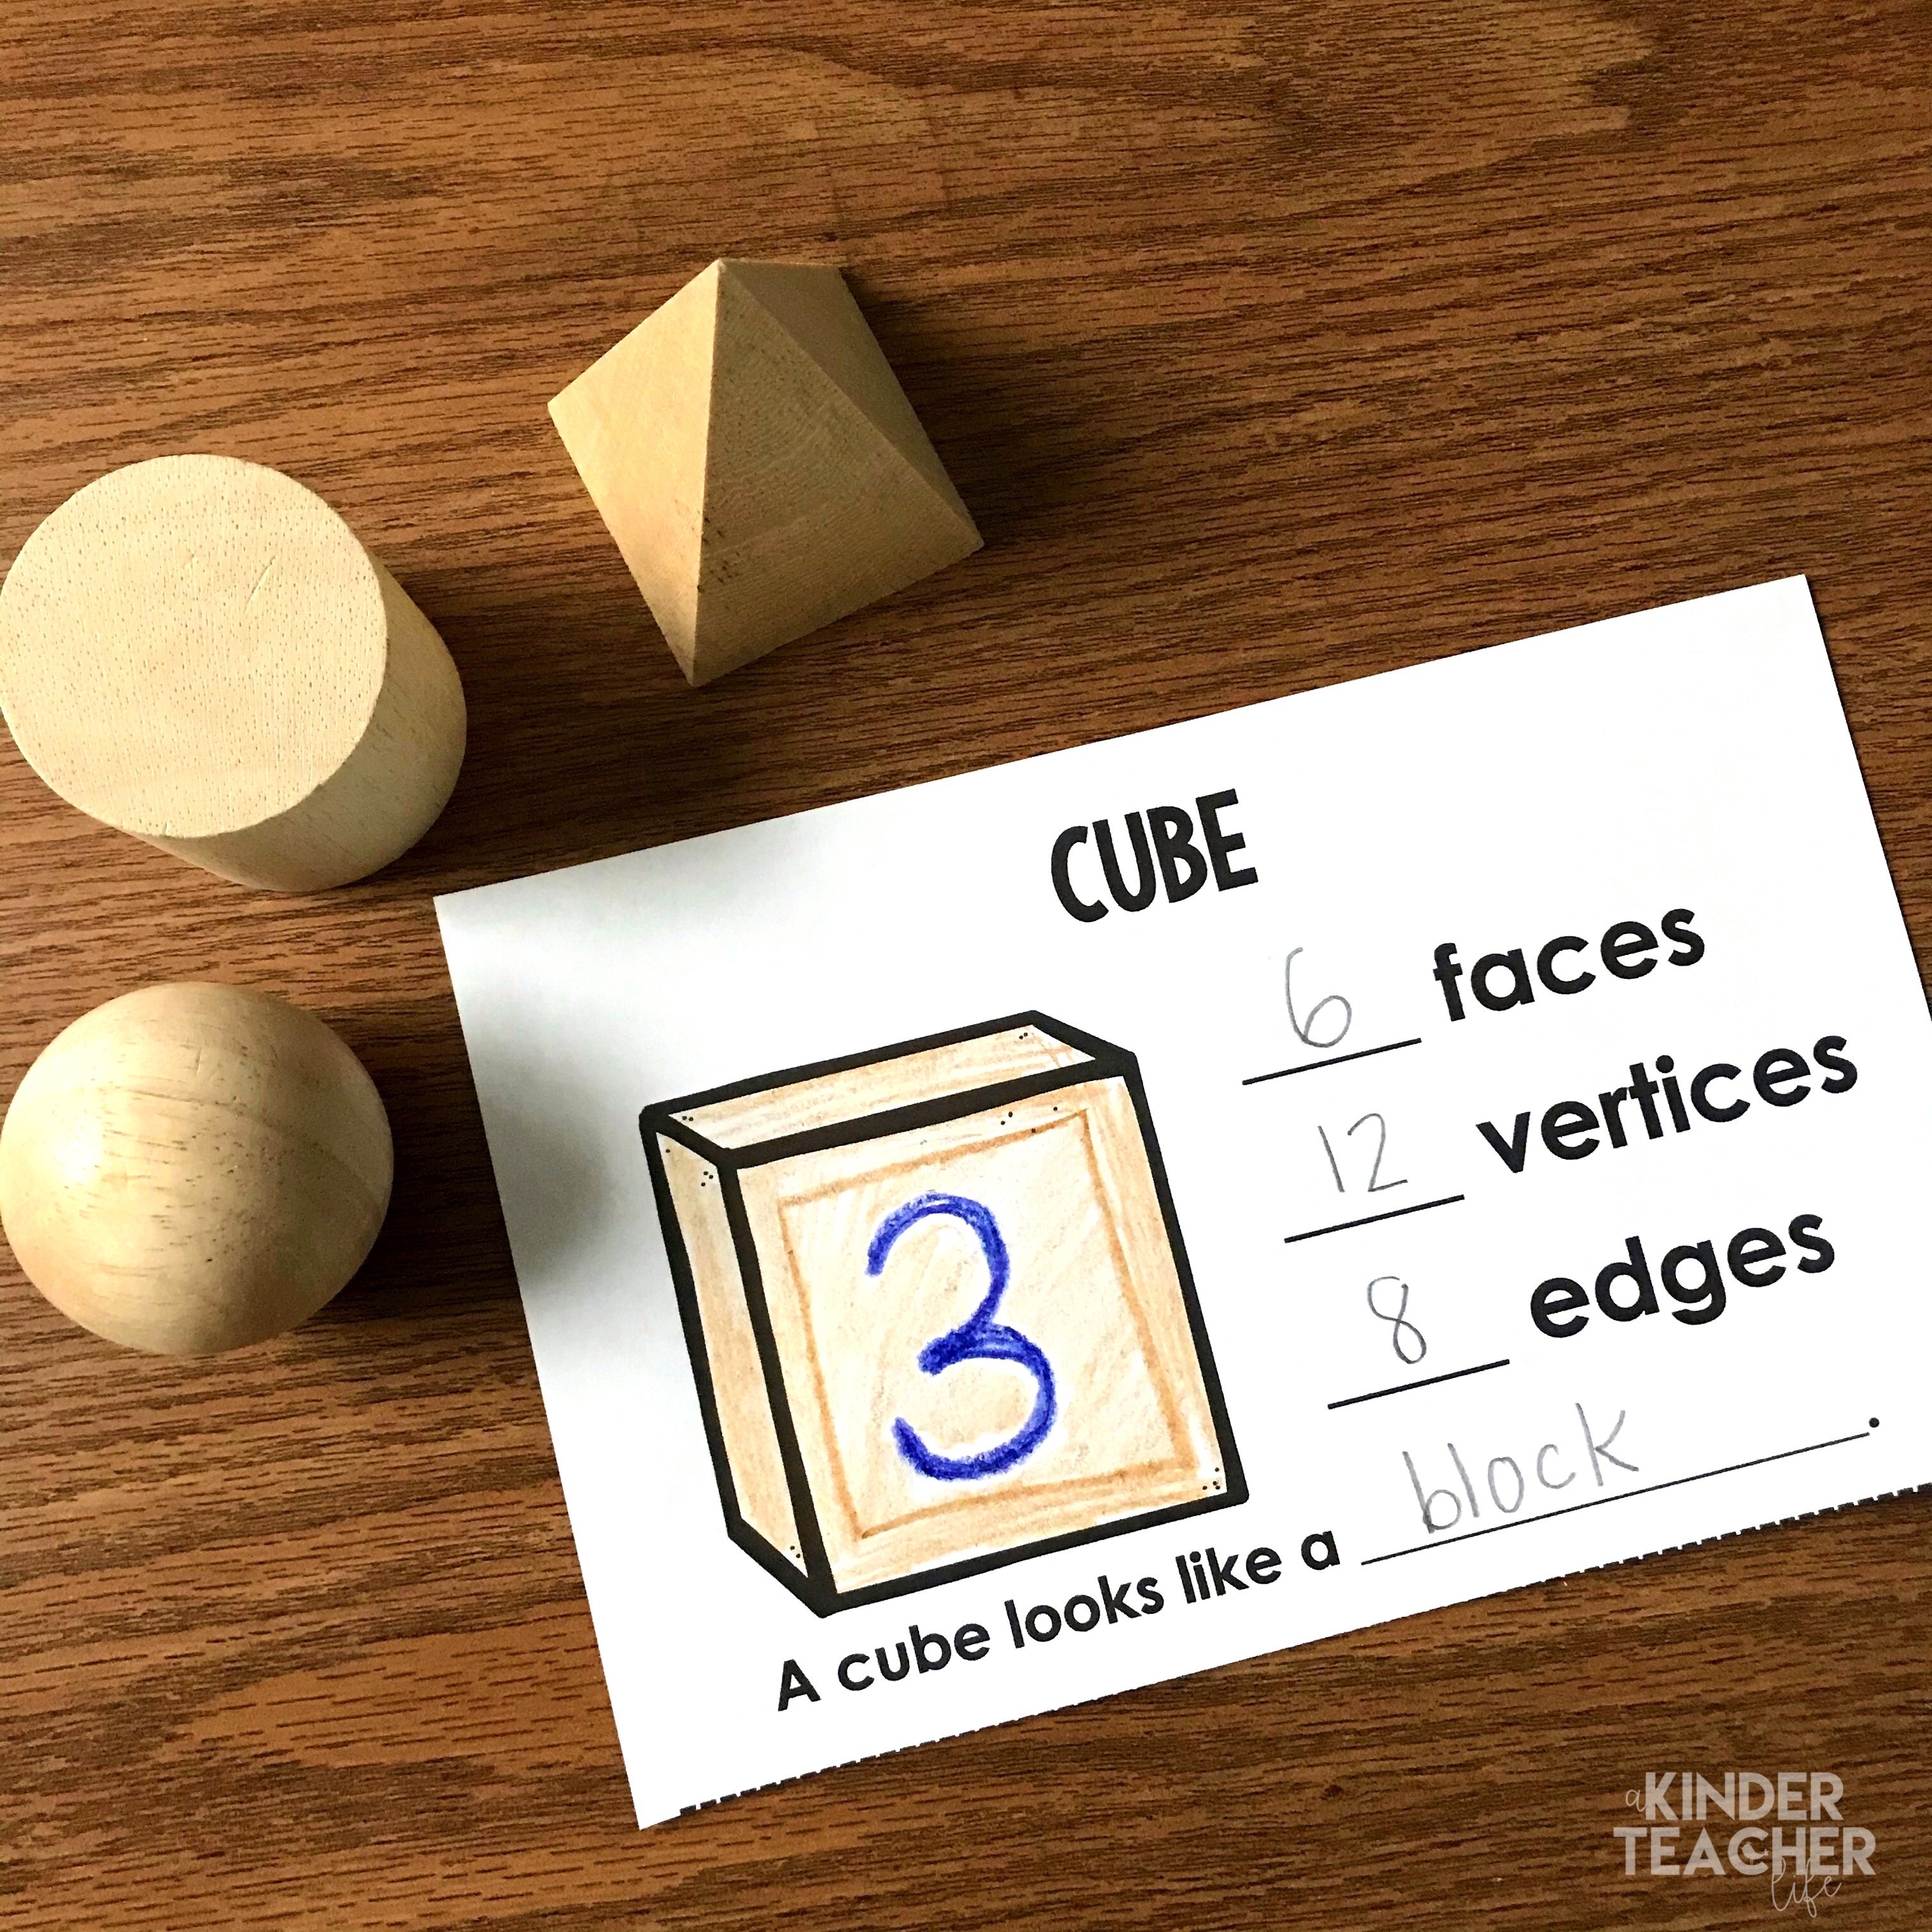 3D Shape booklet - write the attributes of 3D shapes